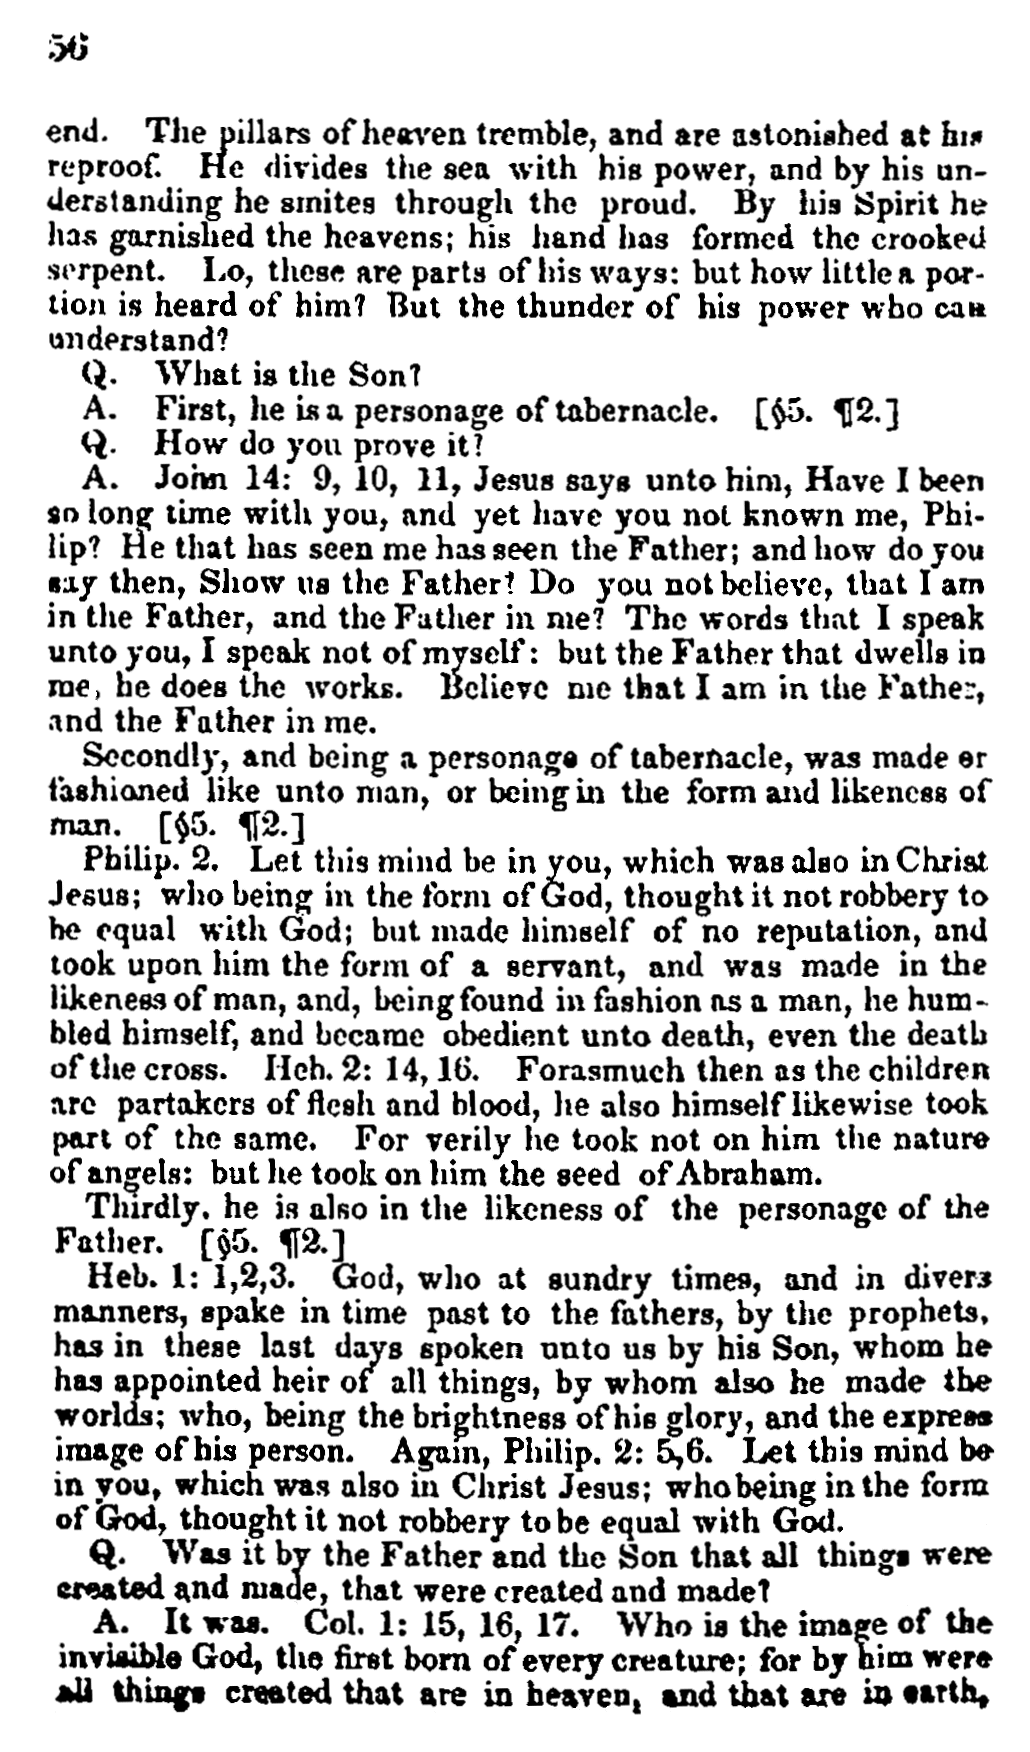 1835 Doctrine & Covenants - Lectures on Faith, p. 56